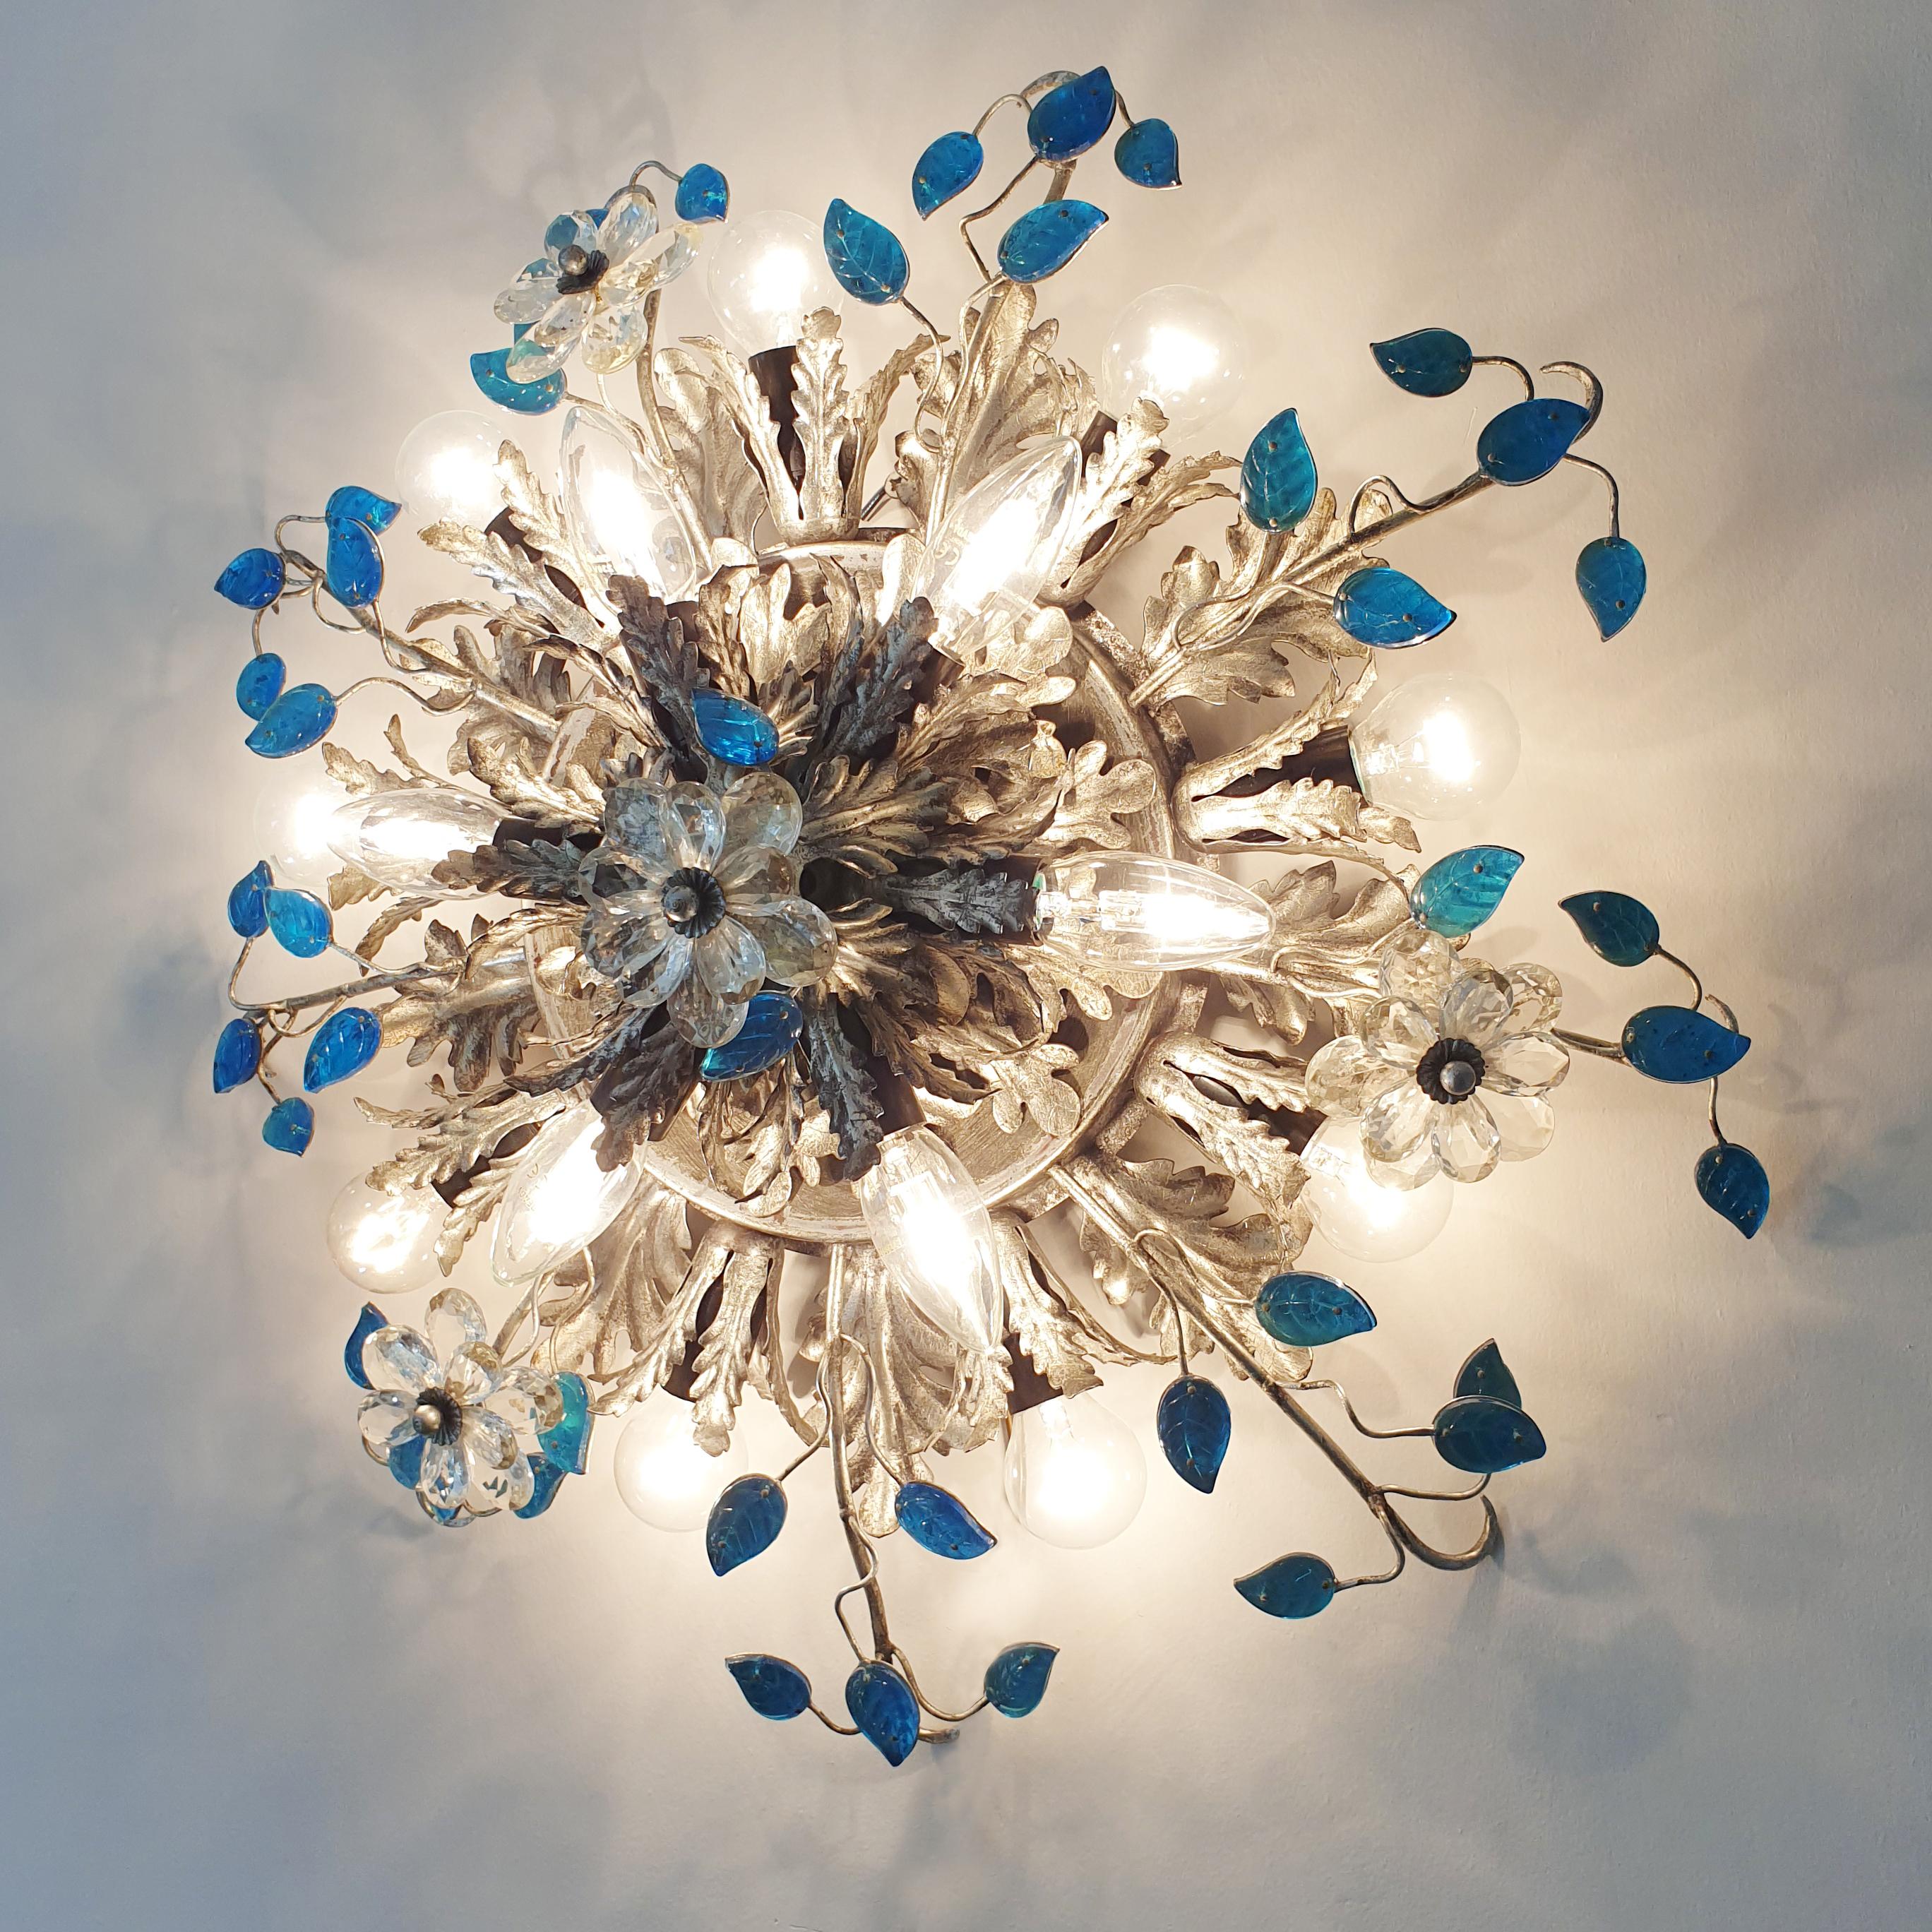 Italian Florentine flushmount ceiling light
Banci Firenze, Italy, 1960s
Double layered, top layer featuring 6 bulb holders, lower layer 9 bulb holders
Stunning silver acanthus leaf design with clear Murano glass flowers and turquoise Murano glass